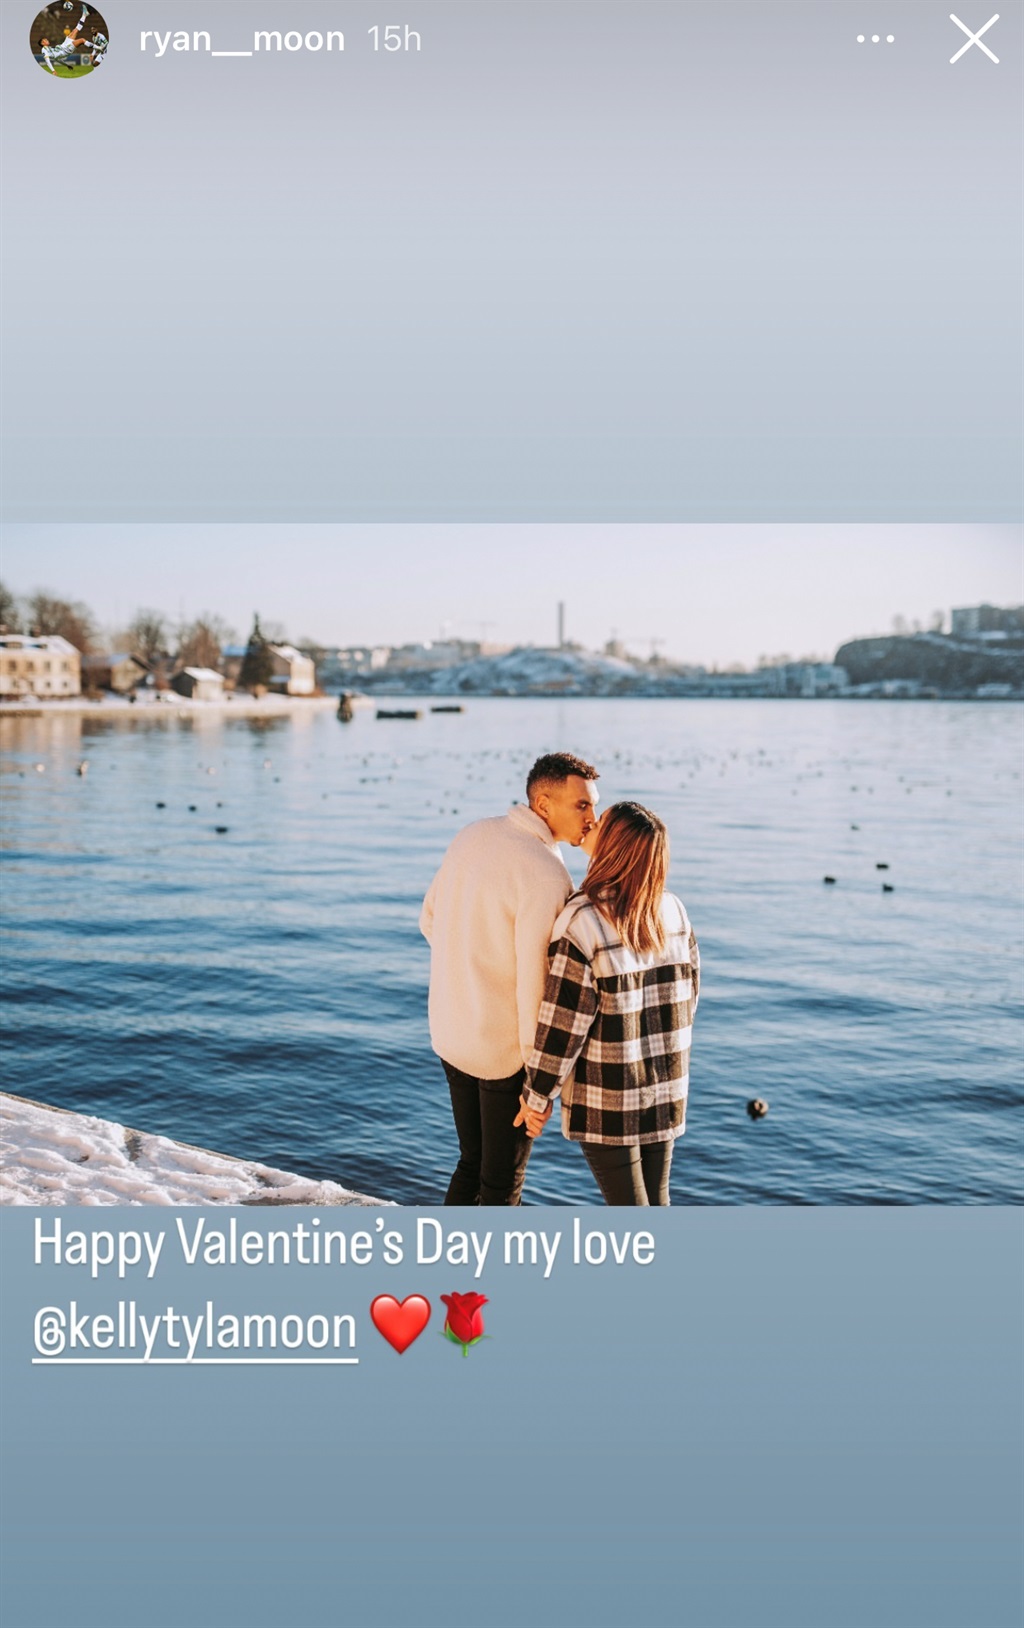 Ryan Moon's Valentine's Day message to his wife.